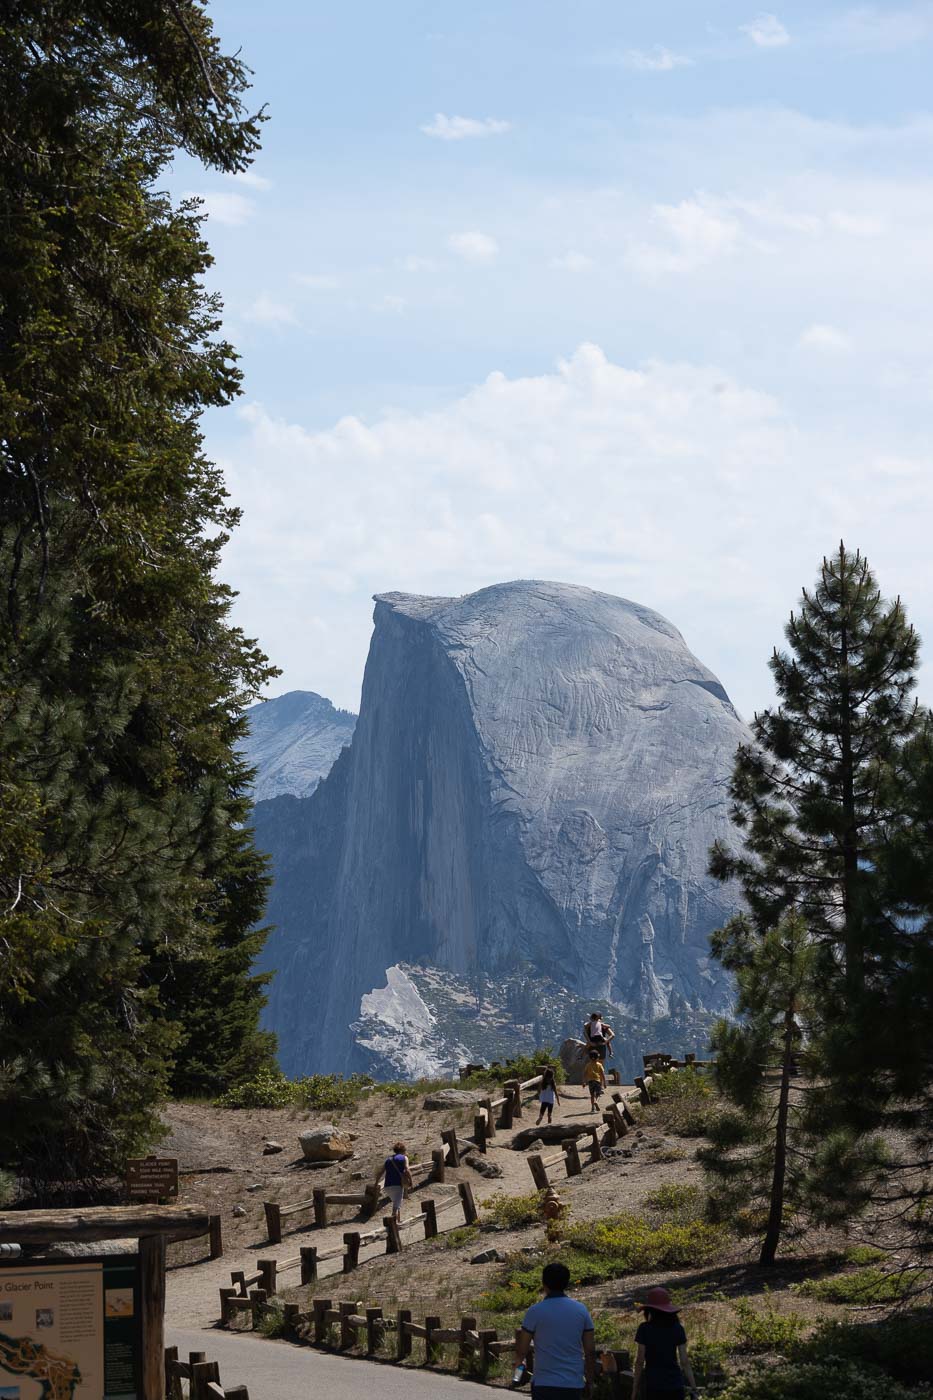 People strolling along a path at Glacier Point, Half Dome looms in the distance.